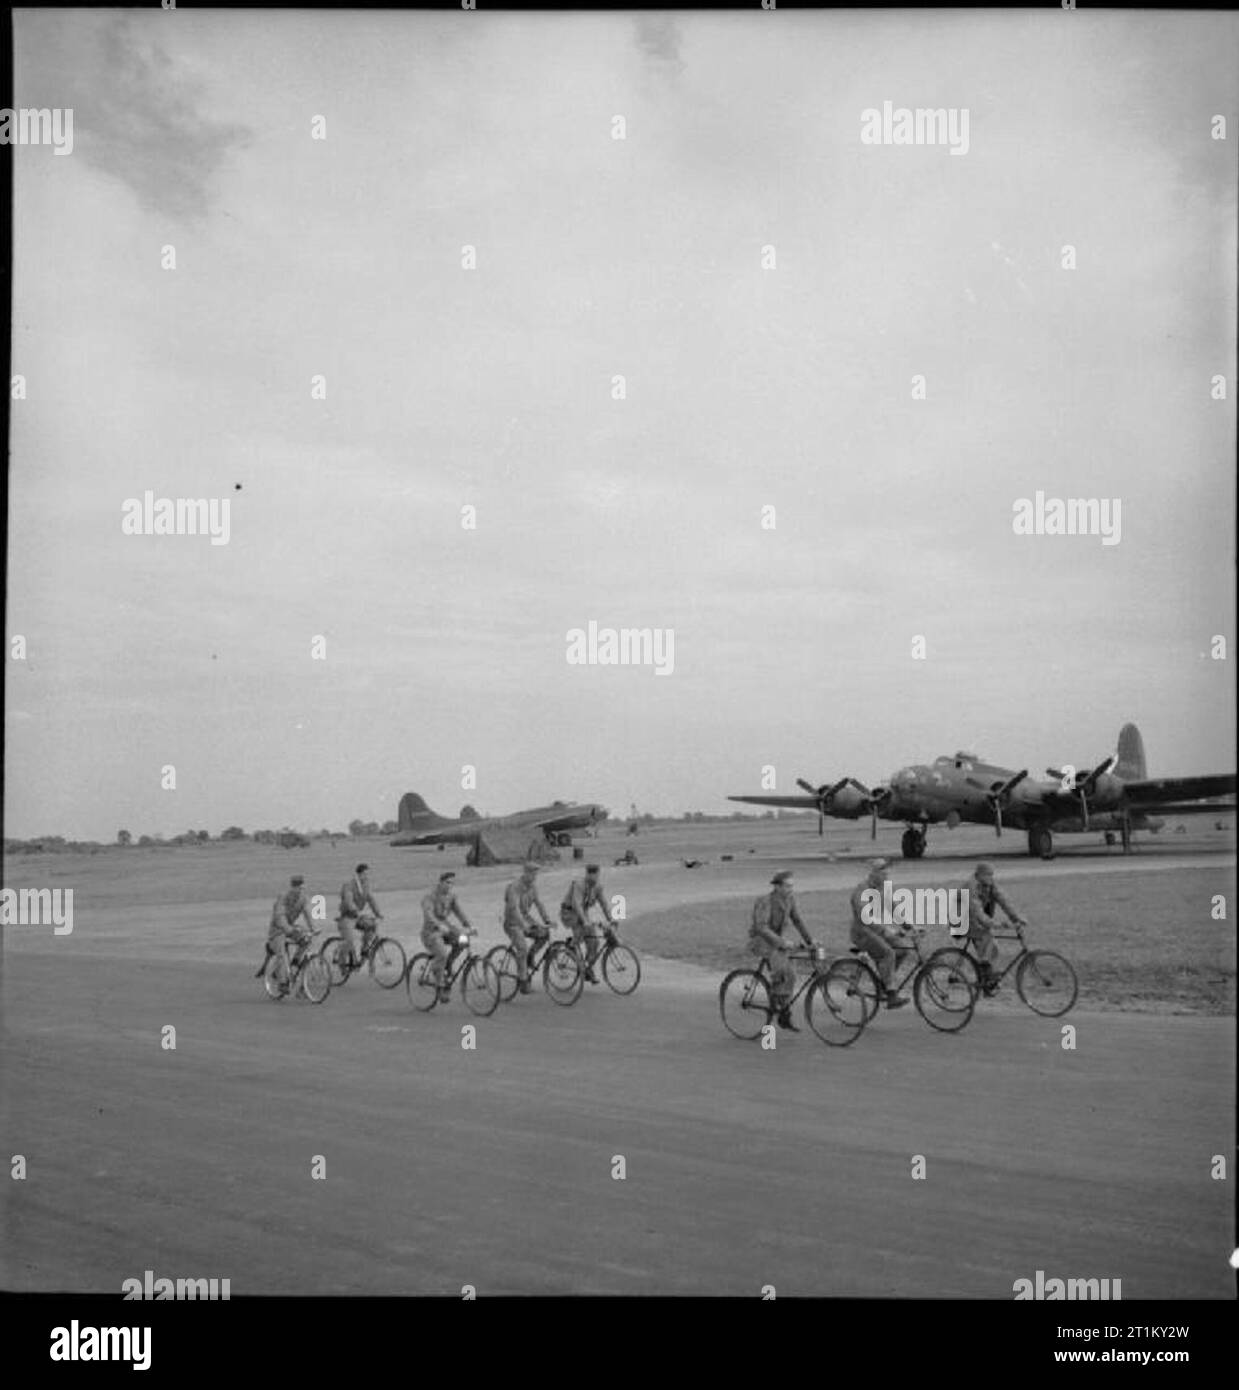 British Equipment at An American Airfield- Anglo-american Co-operation in Wartime Britain, 1943 A large group of bomb-dump staff at an American airfield somewhere in Britain ride bicycles past several aircraft on their way off-base. According to the original caption: 'vast numbers of bicycles are supplied to US Army Air Corps stations where restrictions on motor transport and big areas to be covered make their use essential'. The aircraft on the left features the letters NV, indicating that it is an aircraft of 326 Squadron, 92nd Bombardment Group. Stock Photo